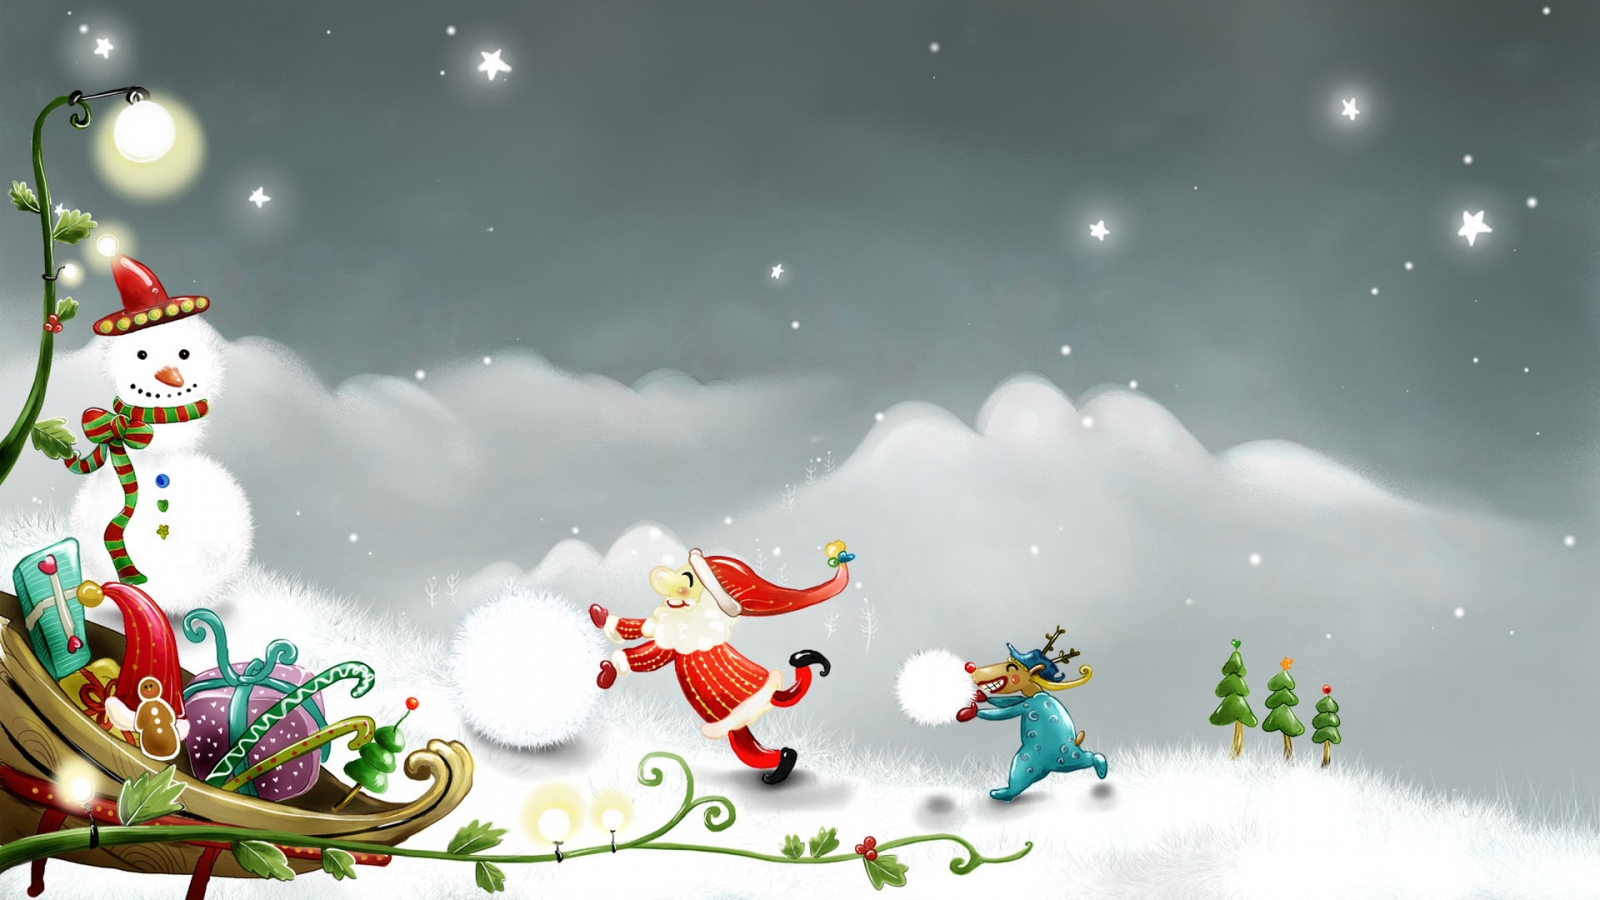 Snowman and Santa Claus for 1600 x 900 HDTV resolution